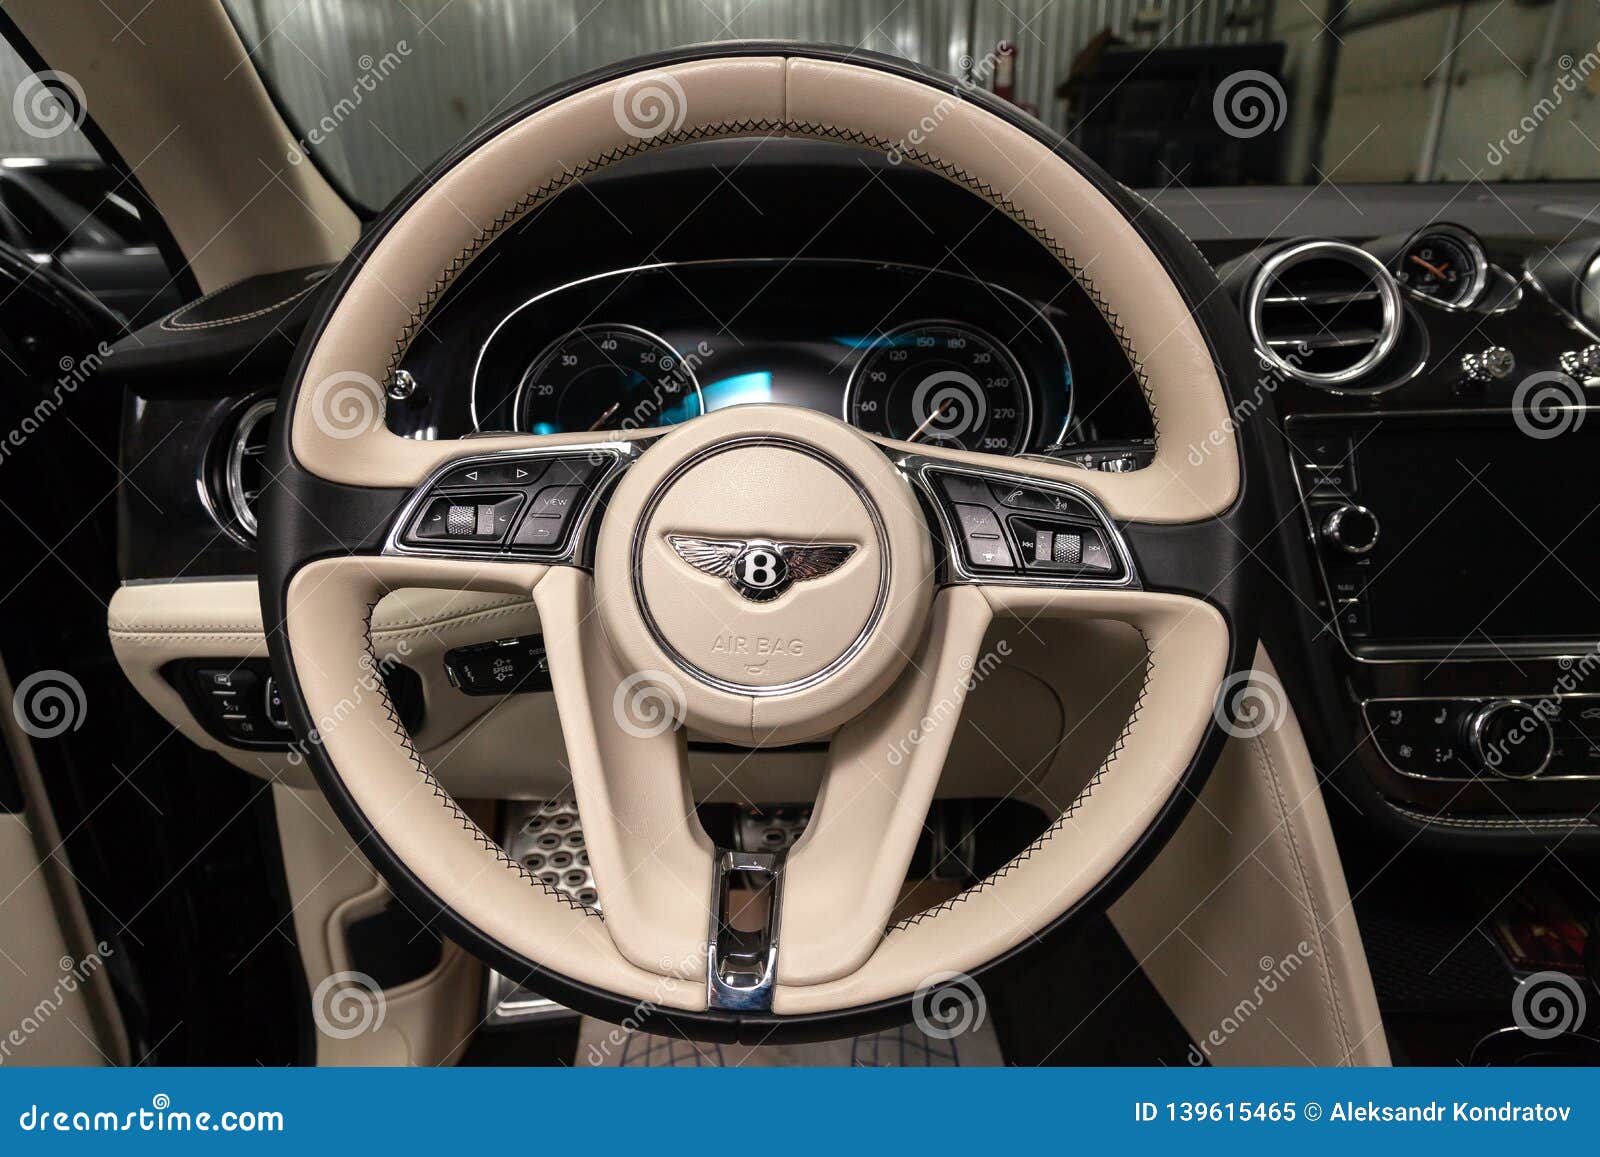 Interior View With Steering Wheel Of Luxury Very Expensive